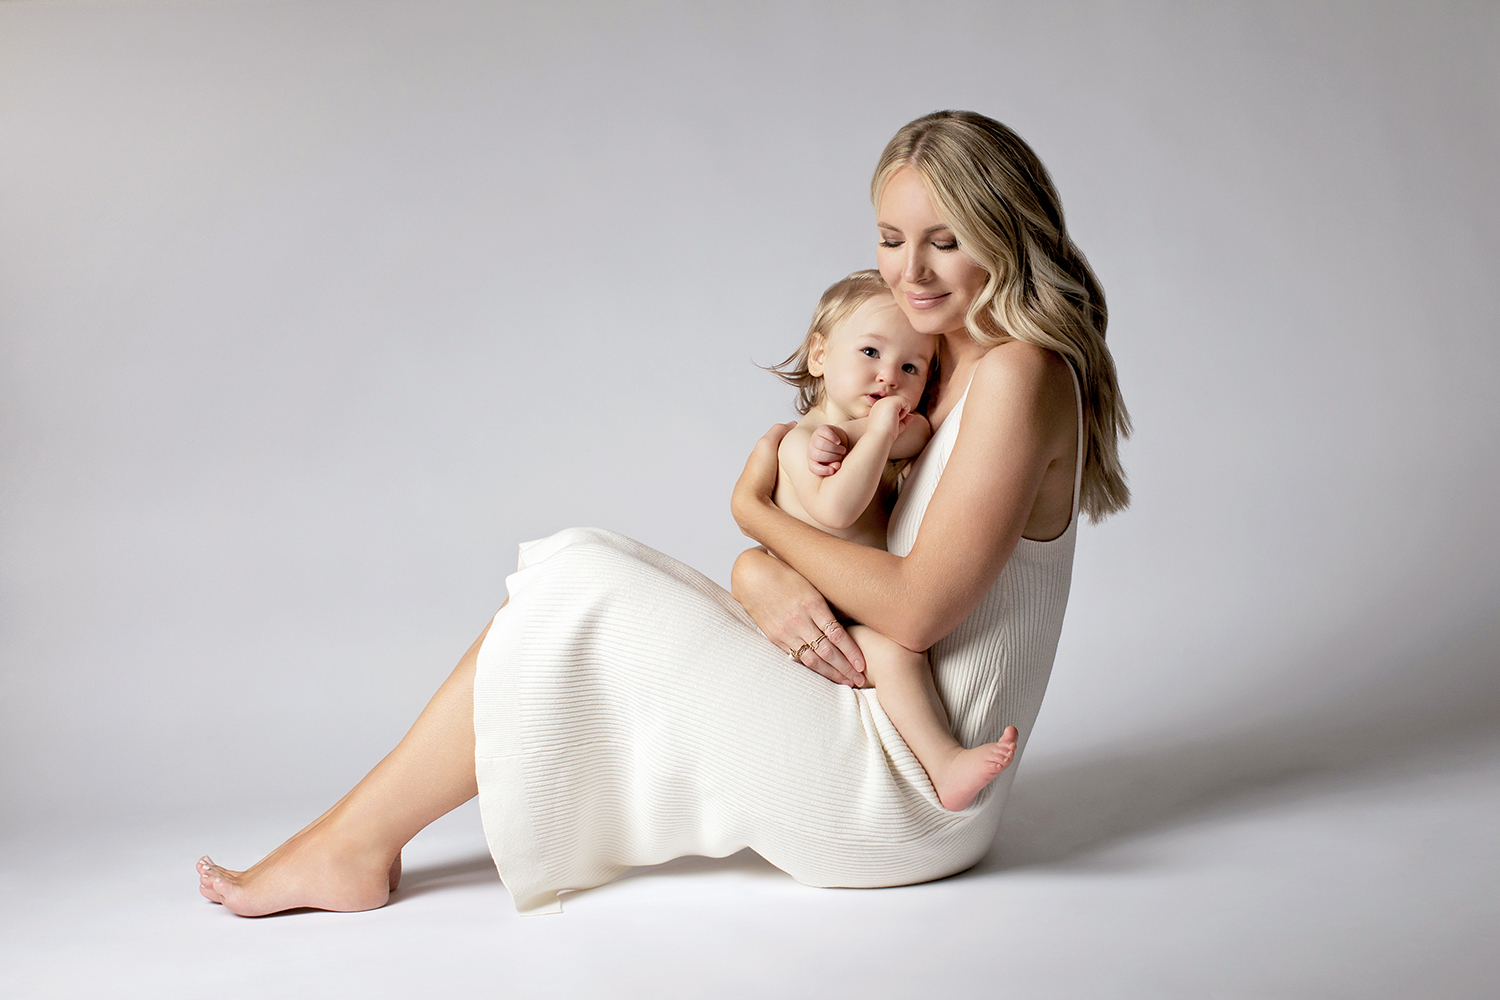 Mom and baby cuddle in a relaxed studio motherhood photography session